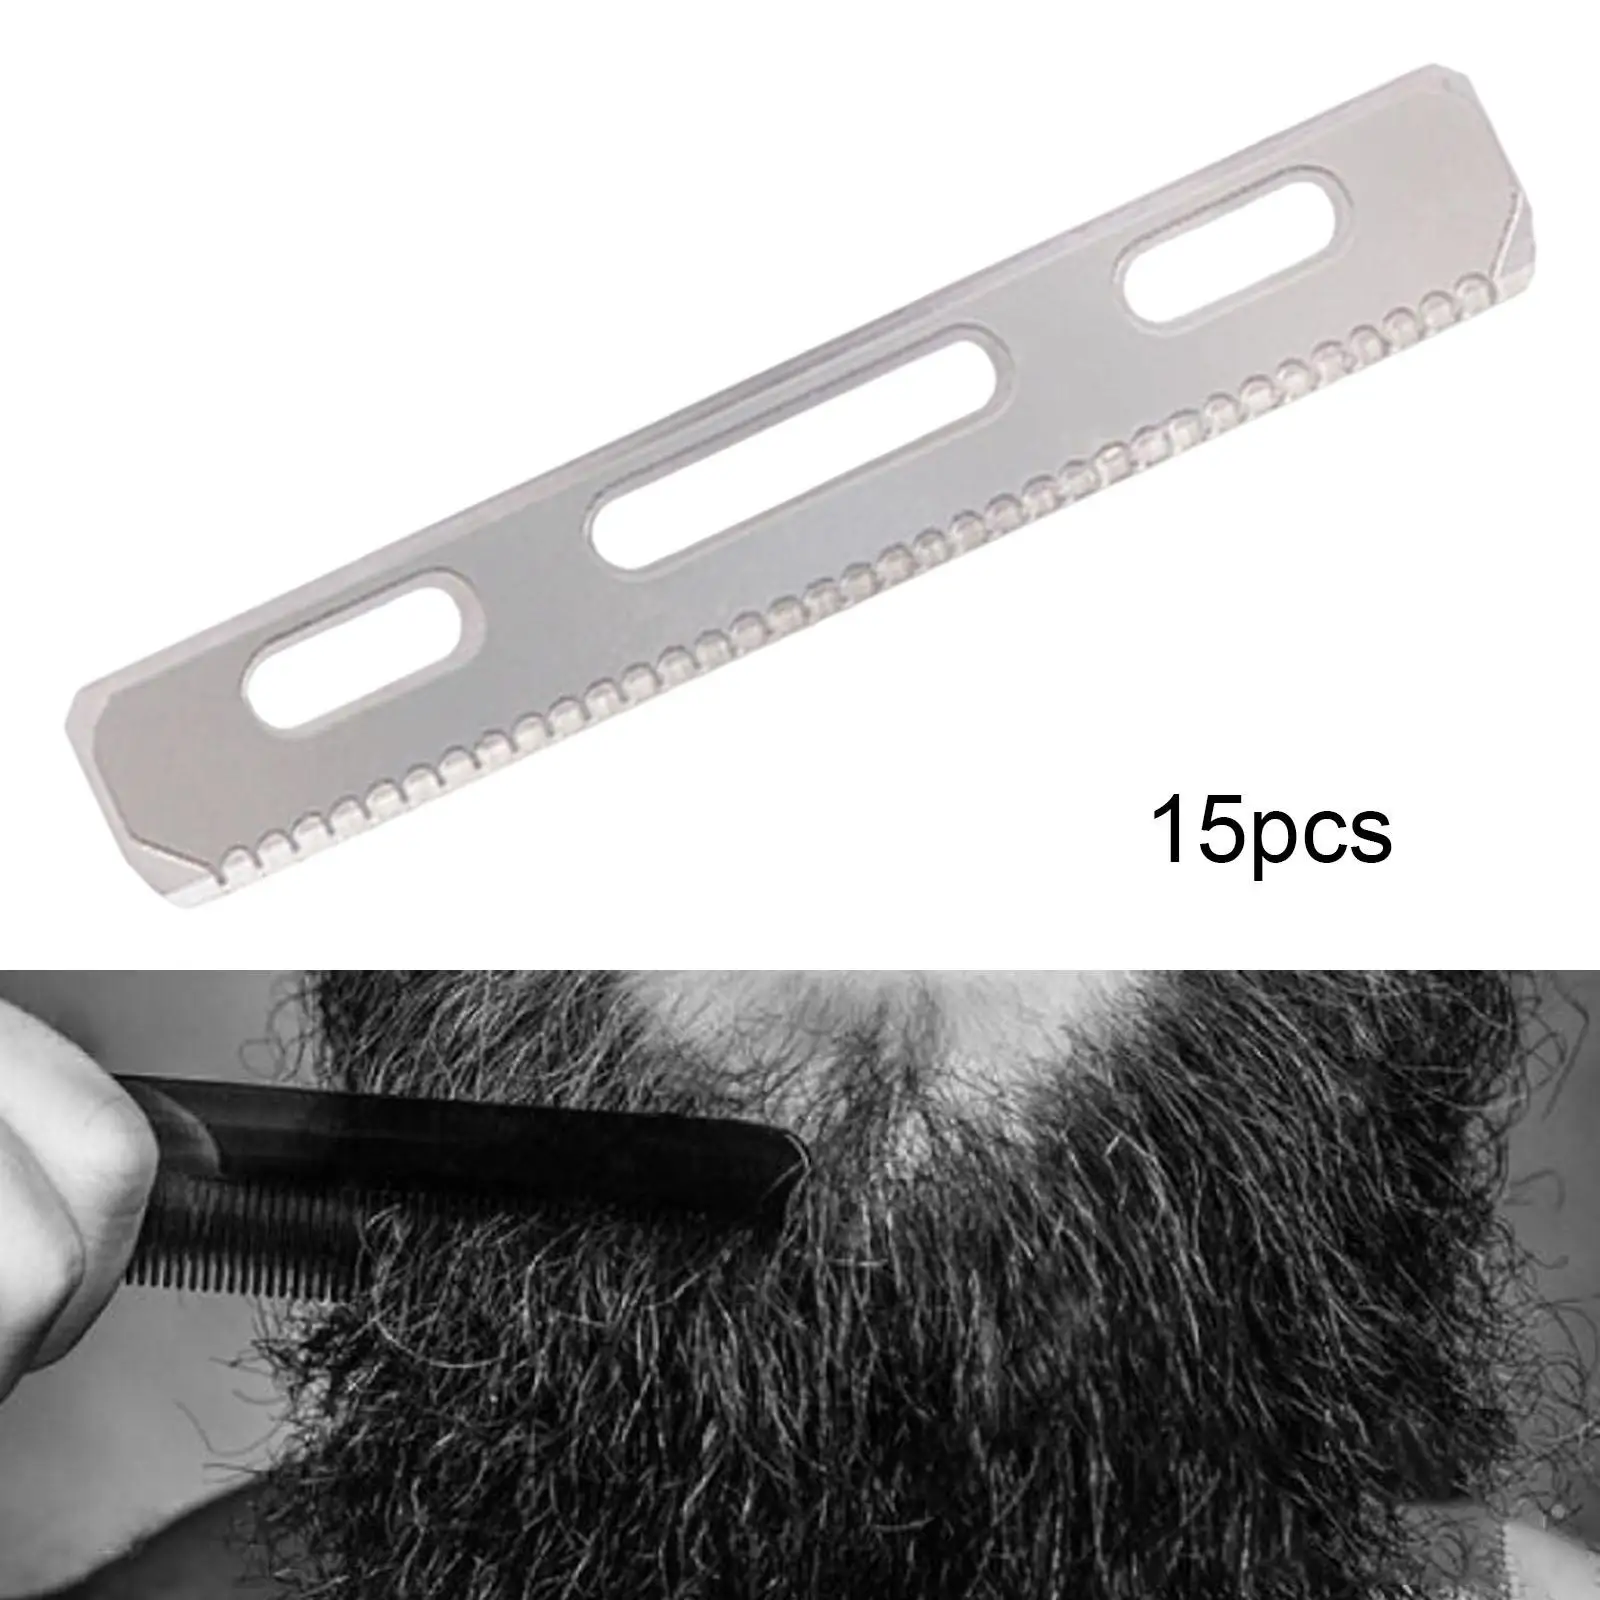 Eyebrow Shaver Facial Stainless steel Tool Eyebrow Makeup Eyebrow Shaping Shaver Knife for Men Women